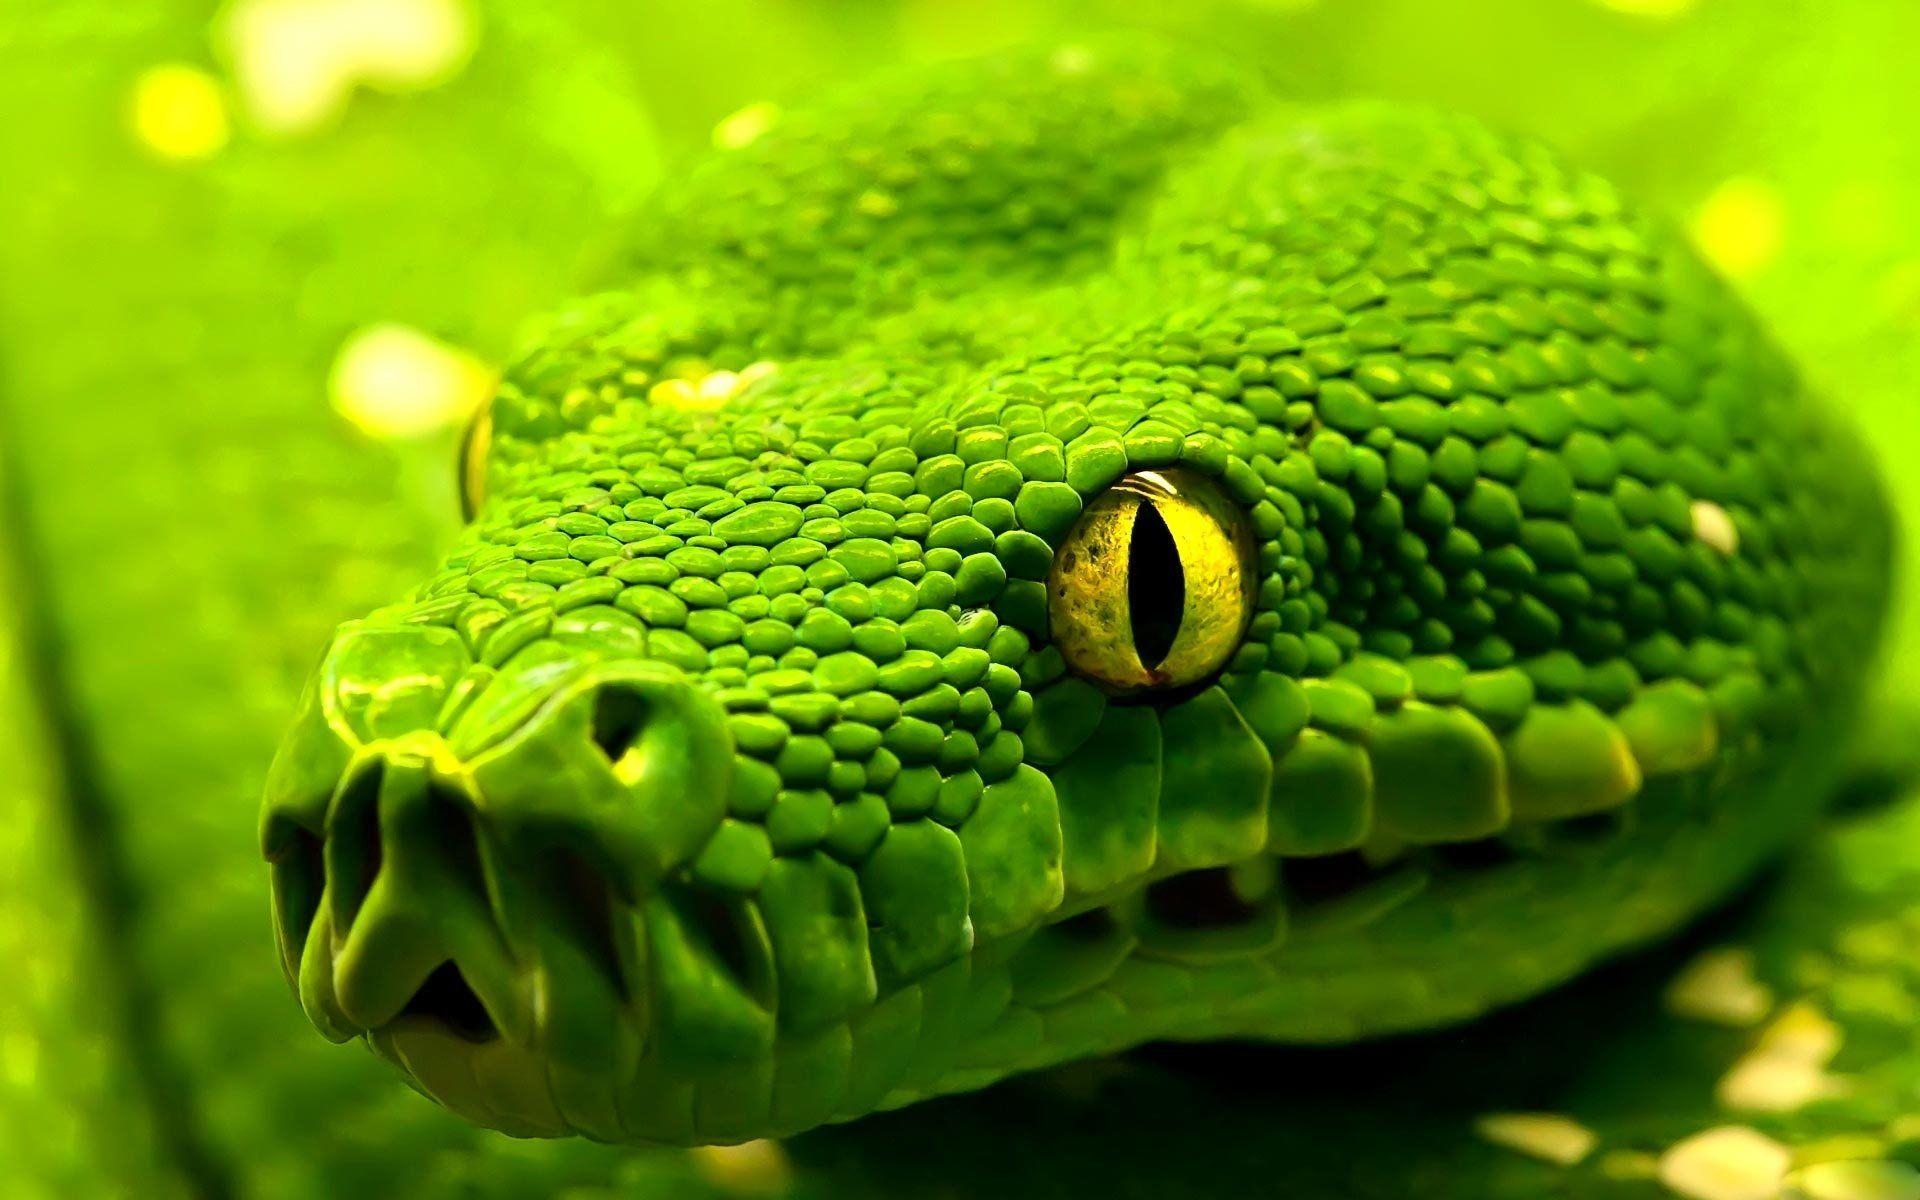 Close Up On The Head Of A Black Venomous Snake Background Picture Of Black  Mamba Snake Background Image And Wallpaper for Free Download